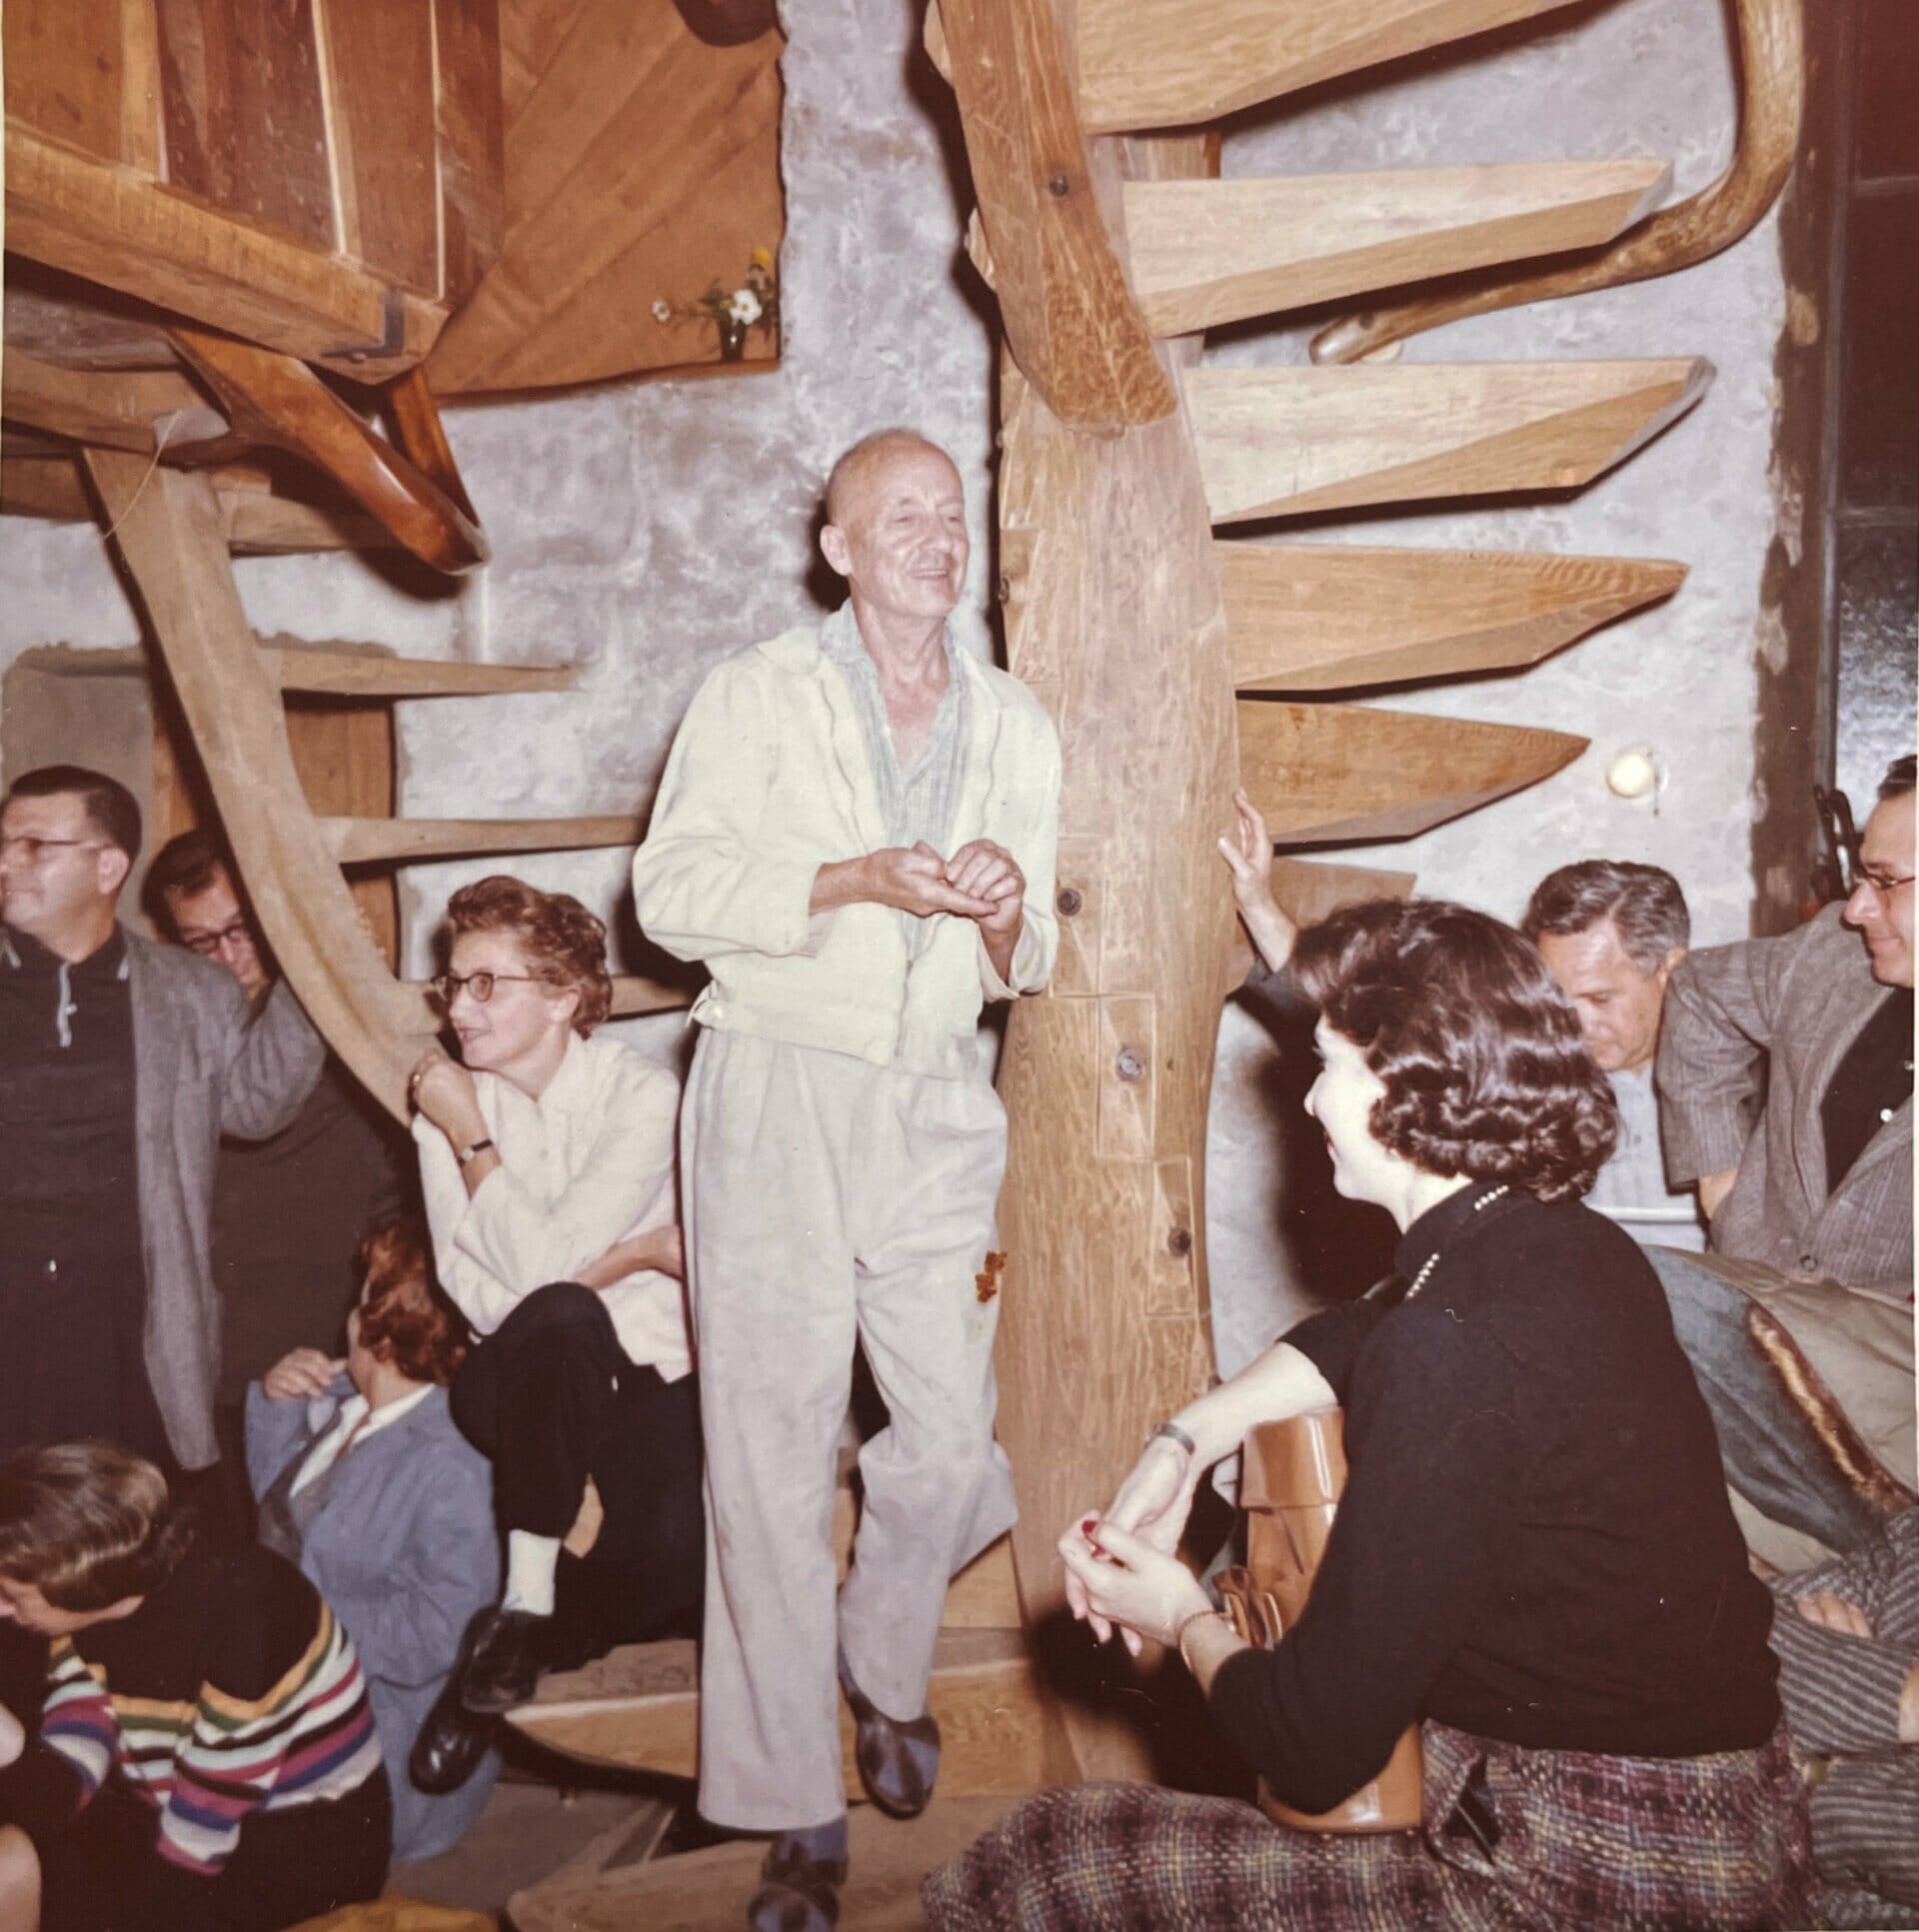 Wharton Esherick standing on spiral staircase during a party he held at the Studio